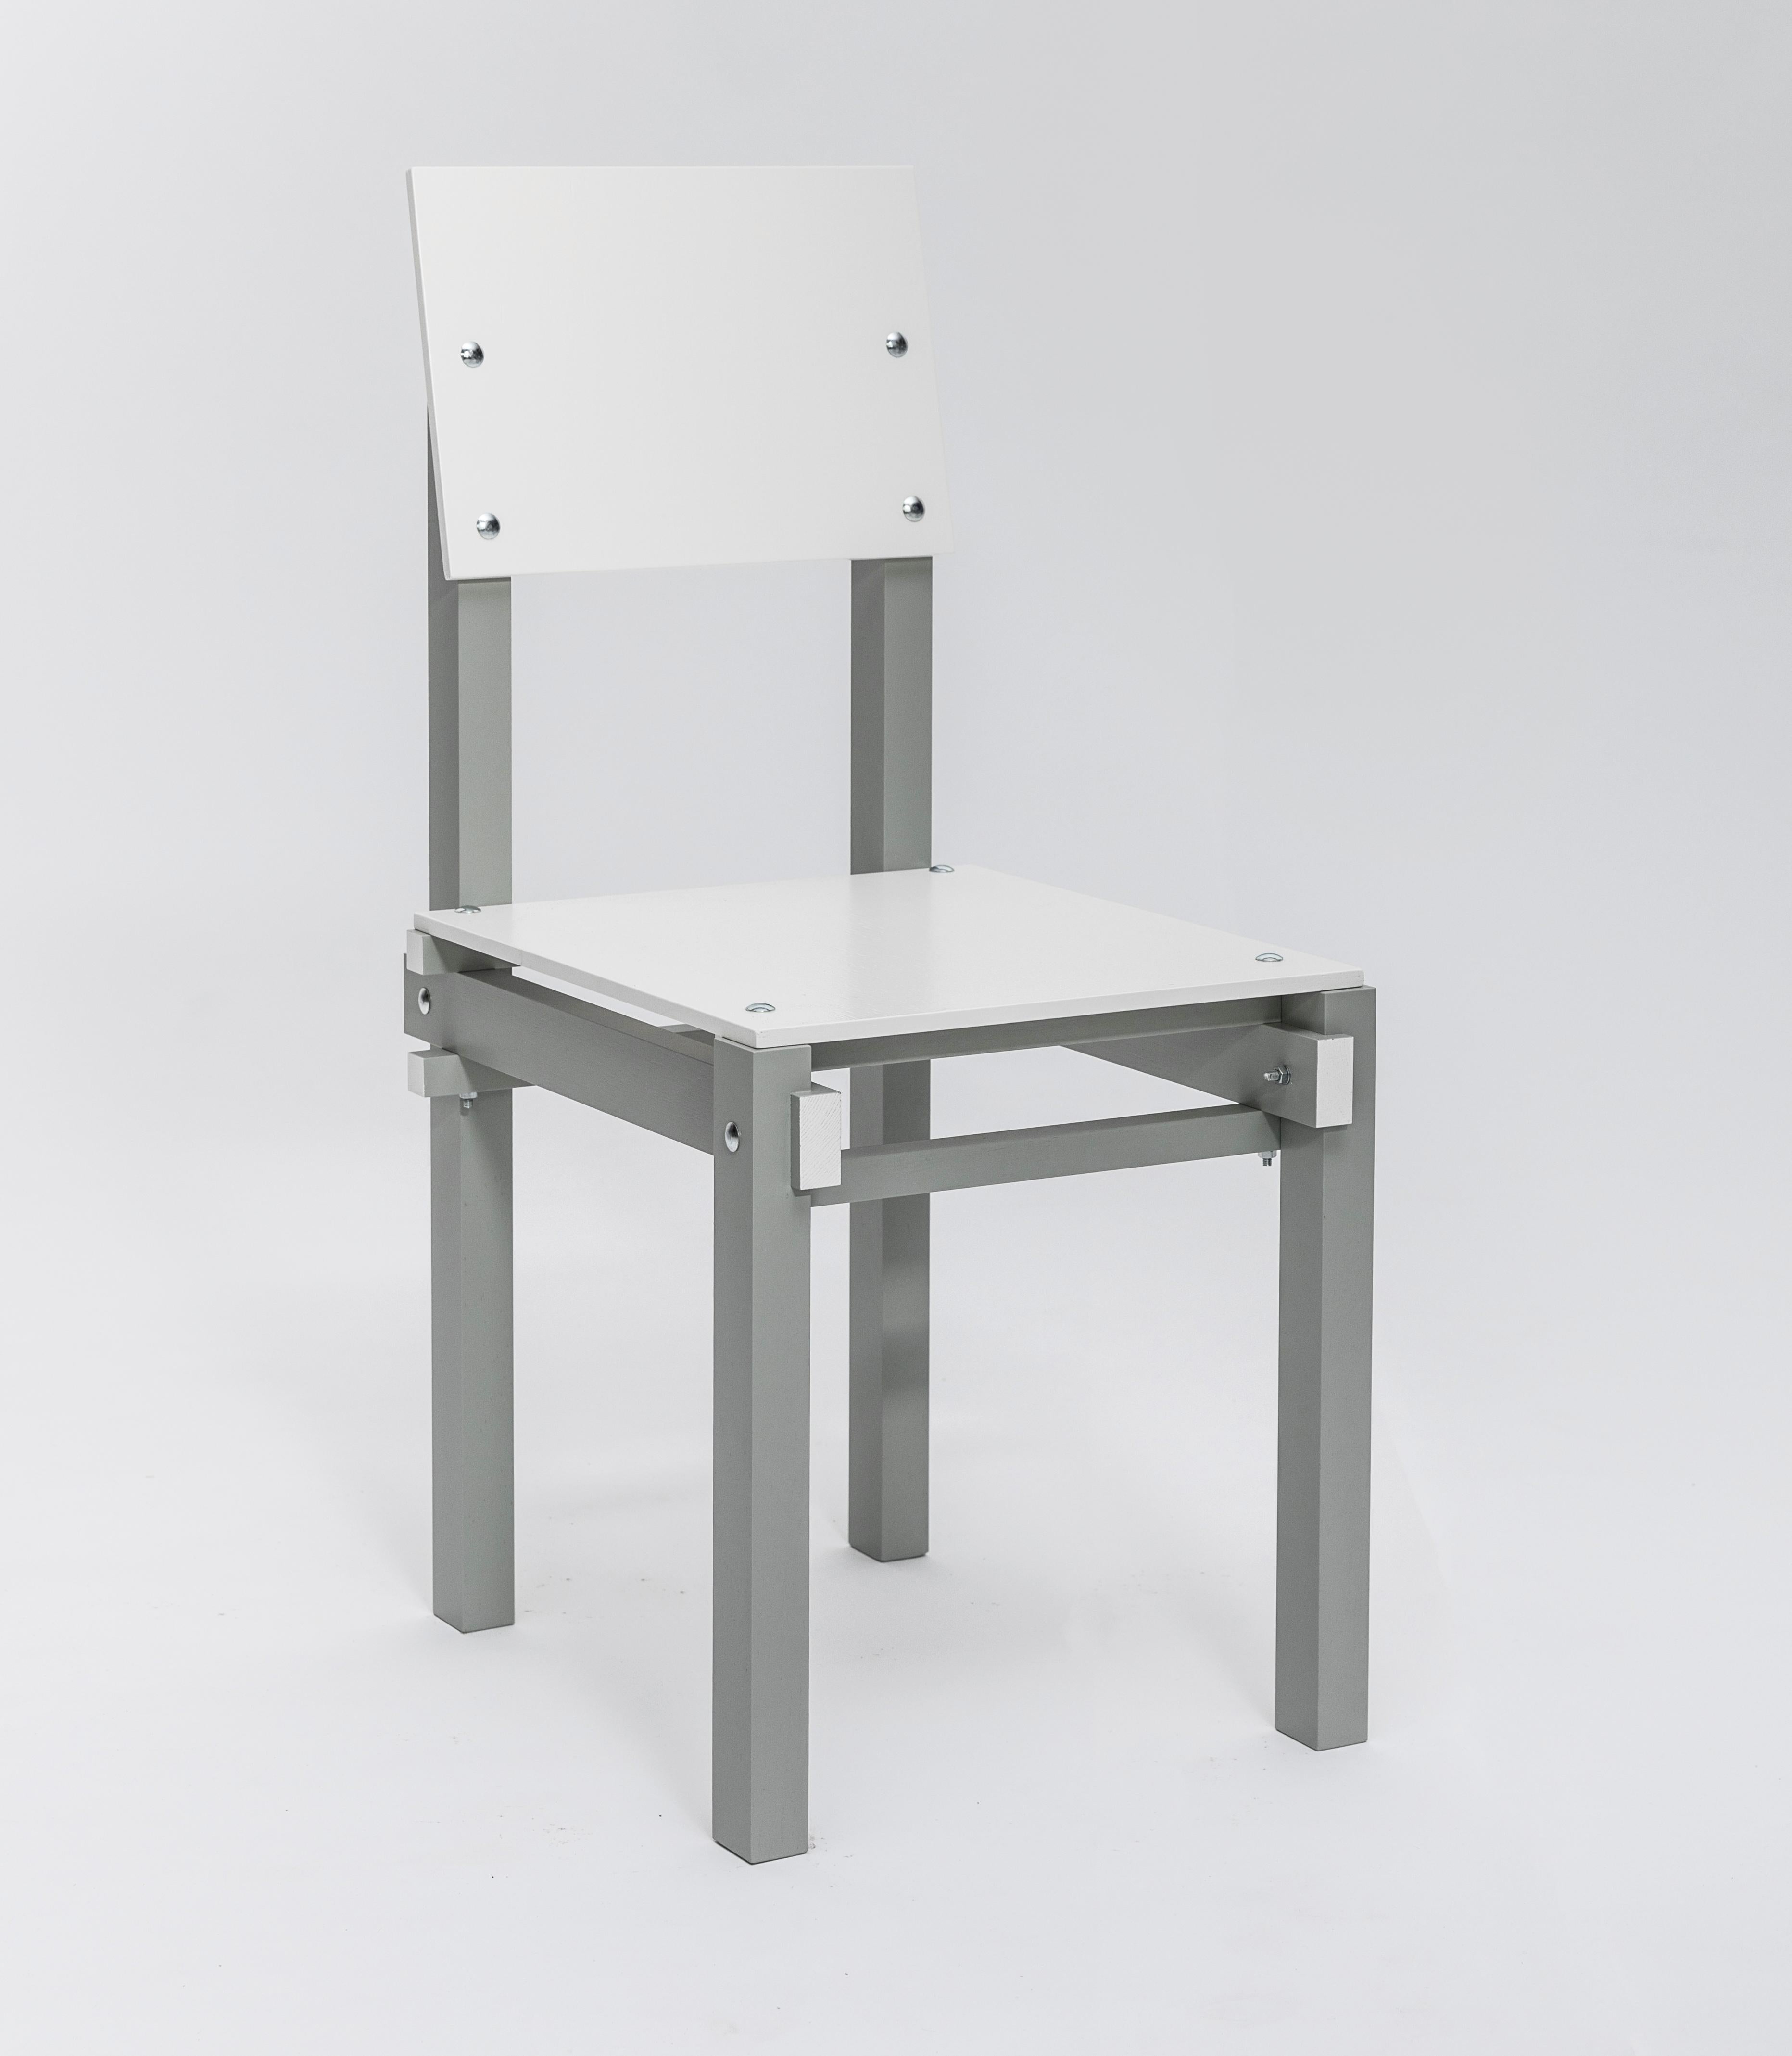 Chair

The Rietveld Military Furniture was designed in 1923 by Gerrit Rietveld for a Catholic Military Home in Utrecht, the Netherlands. The Military series was the first to use nuts and bolts instead of wooden dowels. The military furniture was